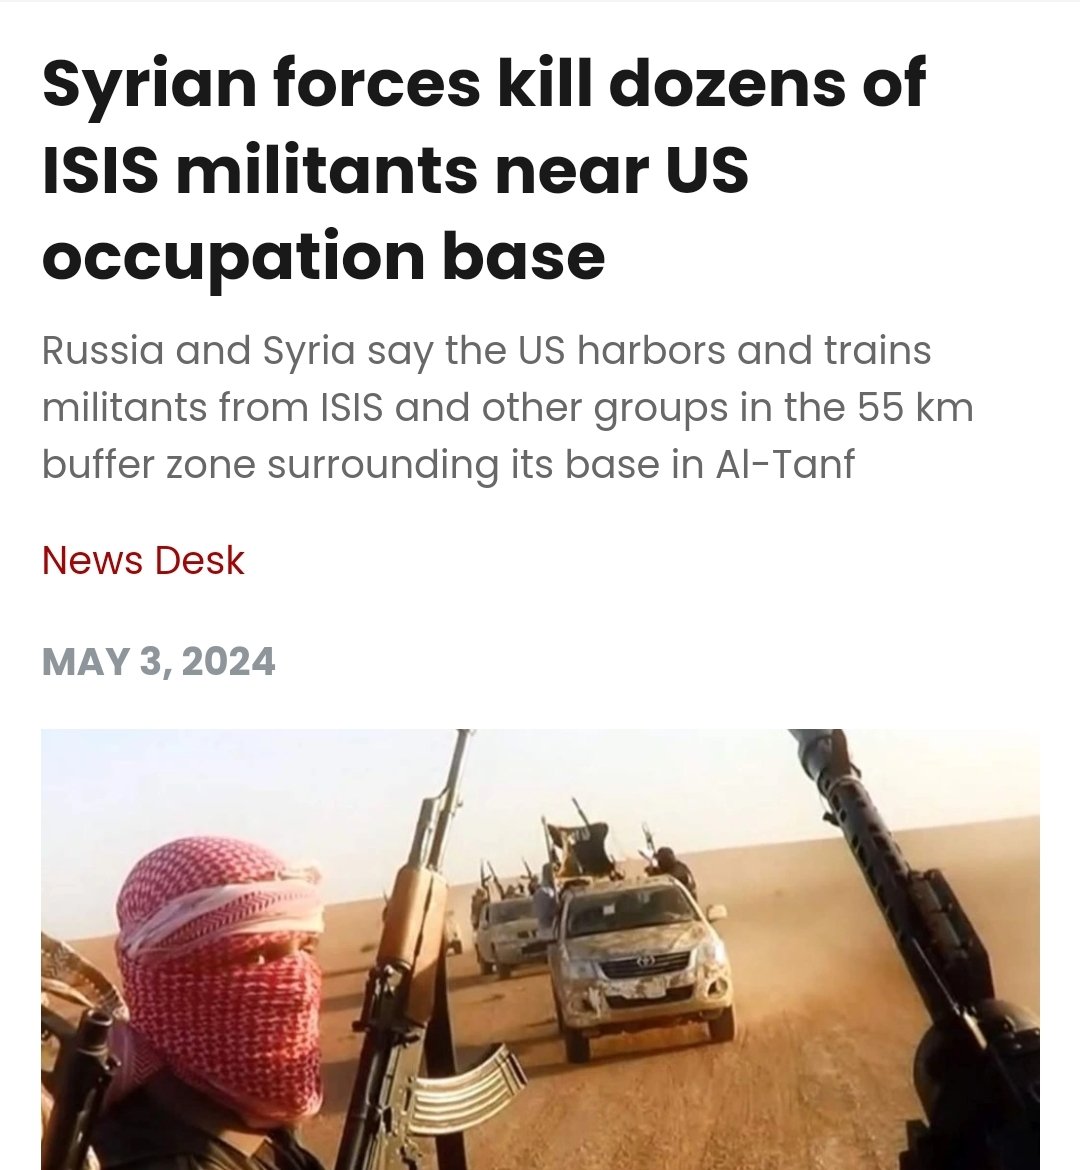 US occupation bases in Syria provide safe haven for terrorist proxies, including ISIS. Russia and Syria say the US harbors and trains militants from ISIS and other groups in the 55 km buffer zone surrounding its base in Al-Tanf. thecradle.co/articles-id/24…